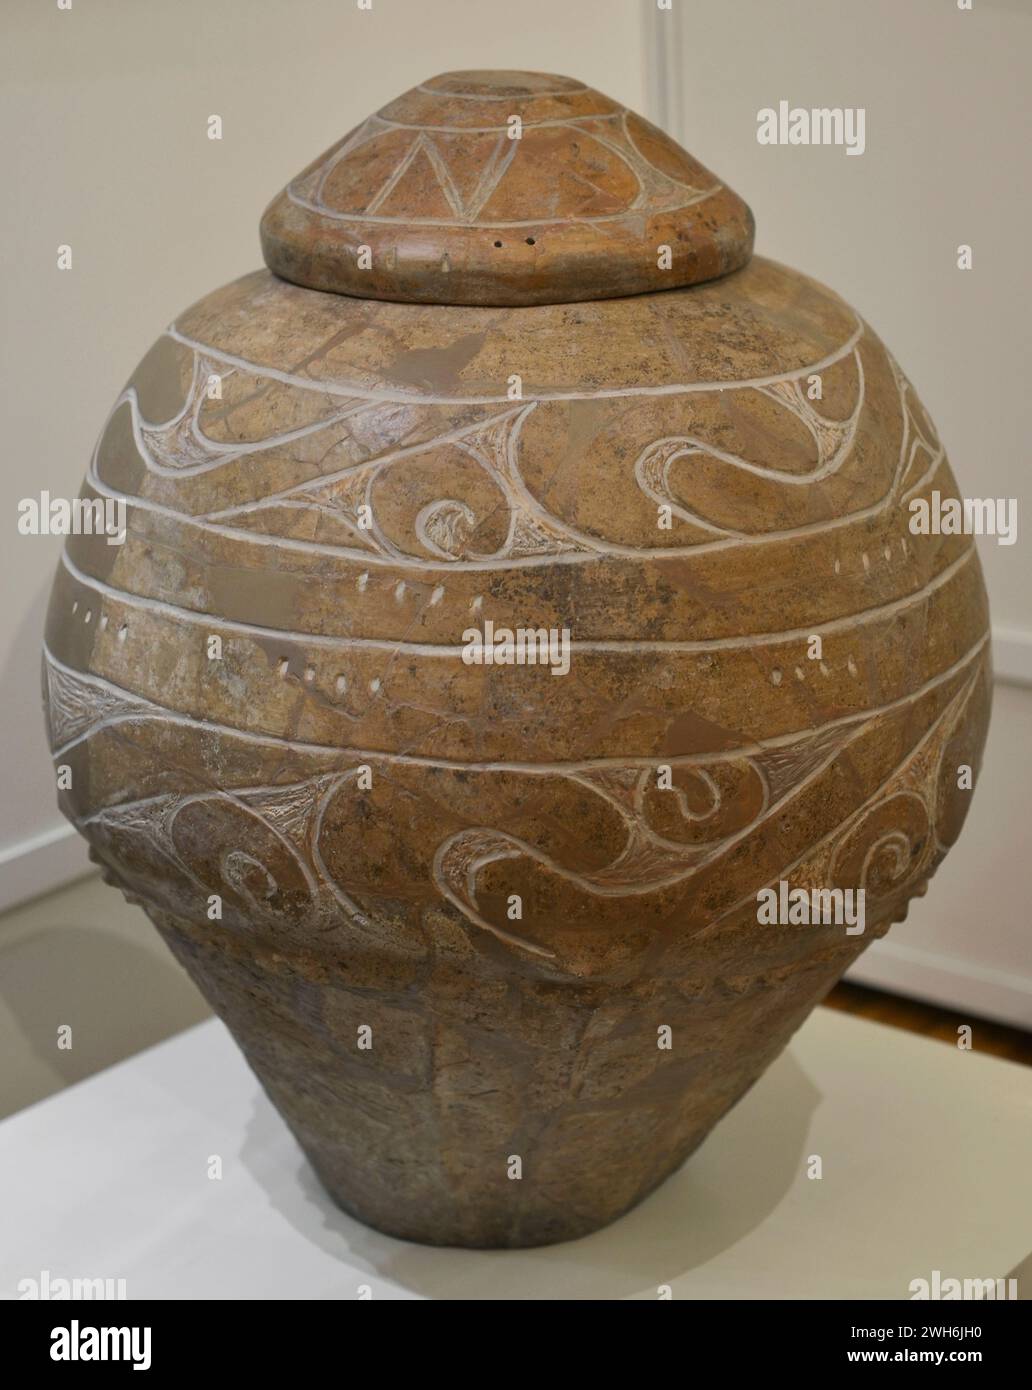 Ceramic storage vessel with a lid. Late Chalcolithic. Second half of the 5th millennium BC. From the tell site 'Skritata Mogila', Poroy, Burgas province, Bulgaria. National Archaeological Museum. Sofia. Bulgaria. Stock Photo